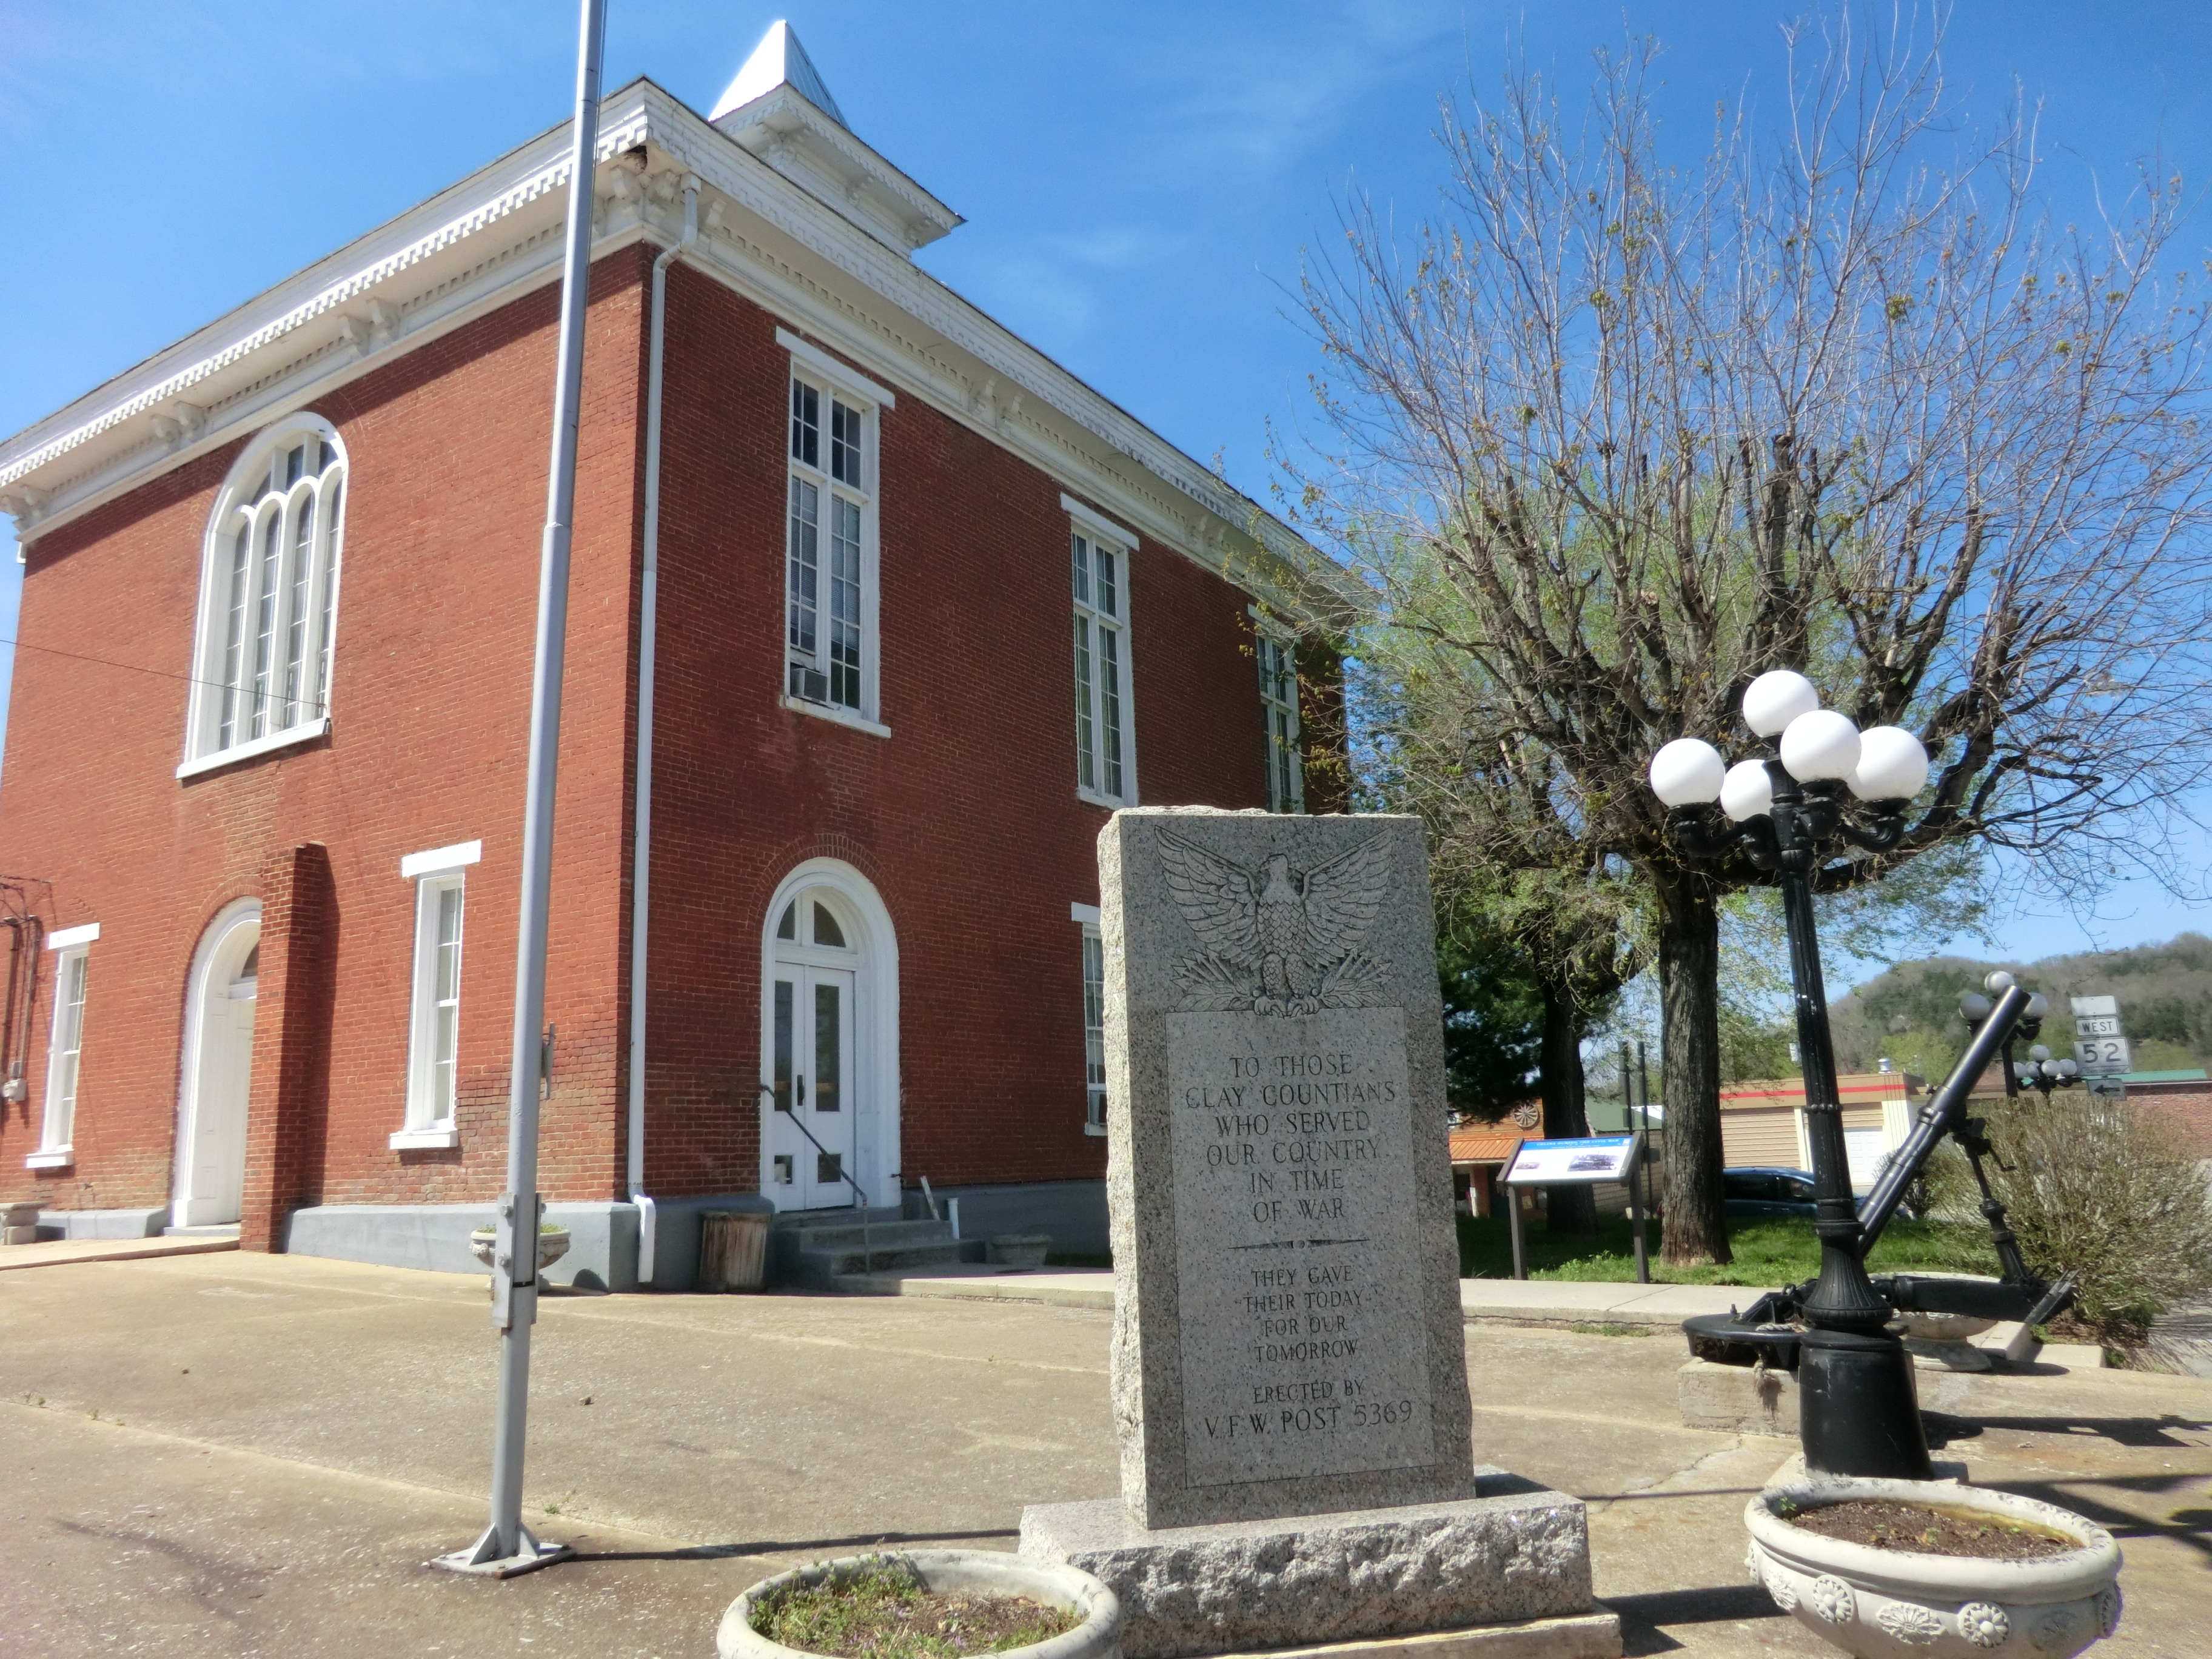 Clay County Memorial-Courthouse grounds